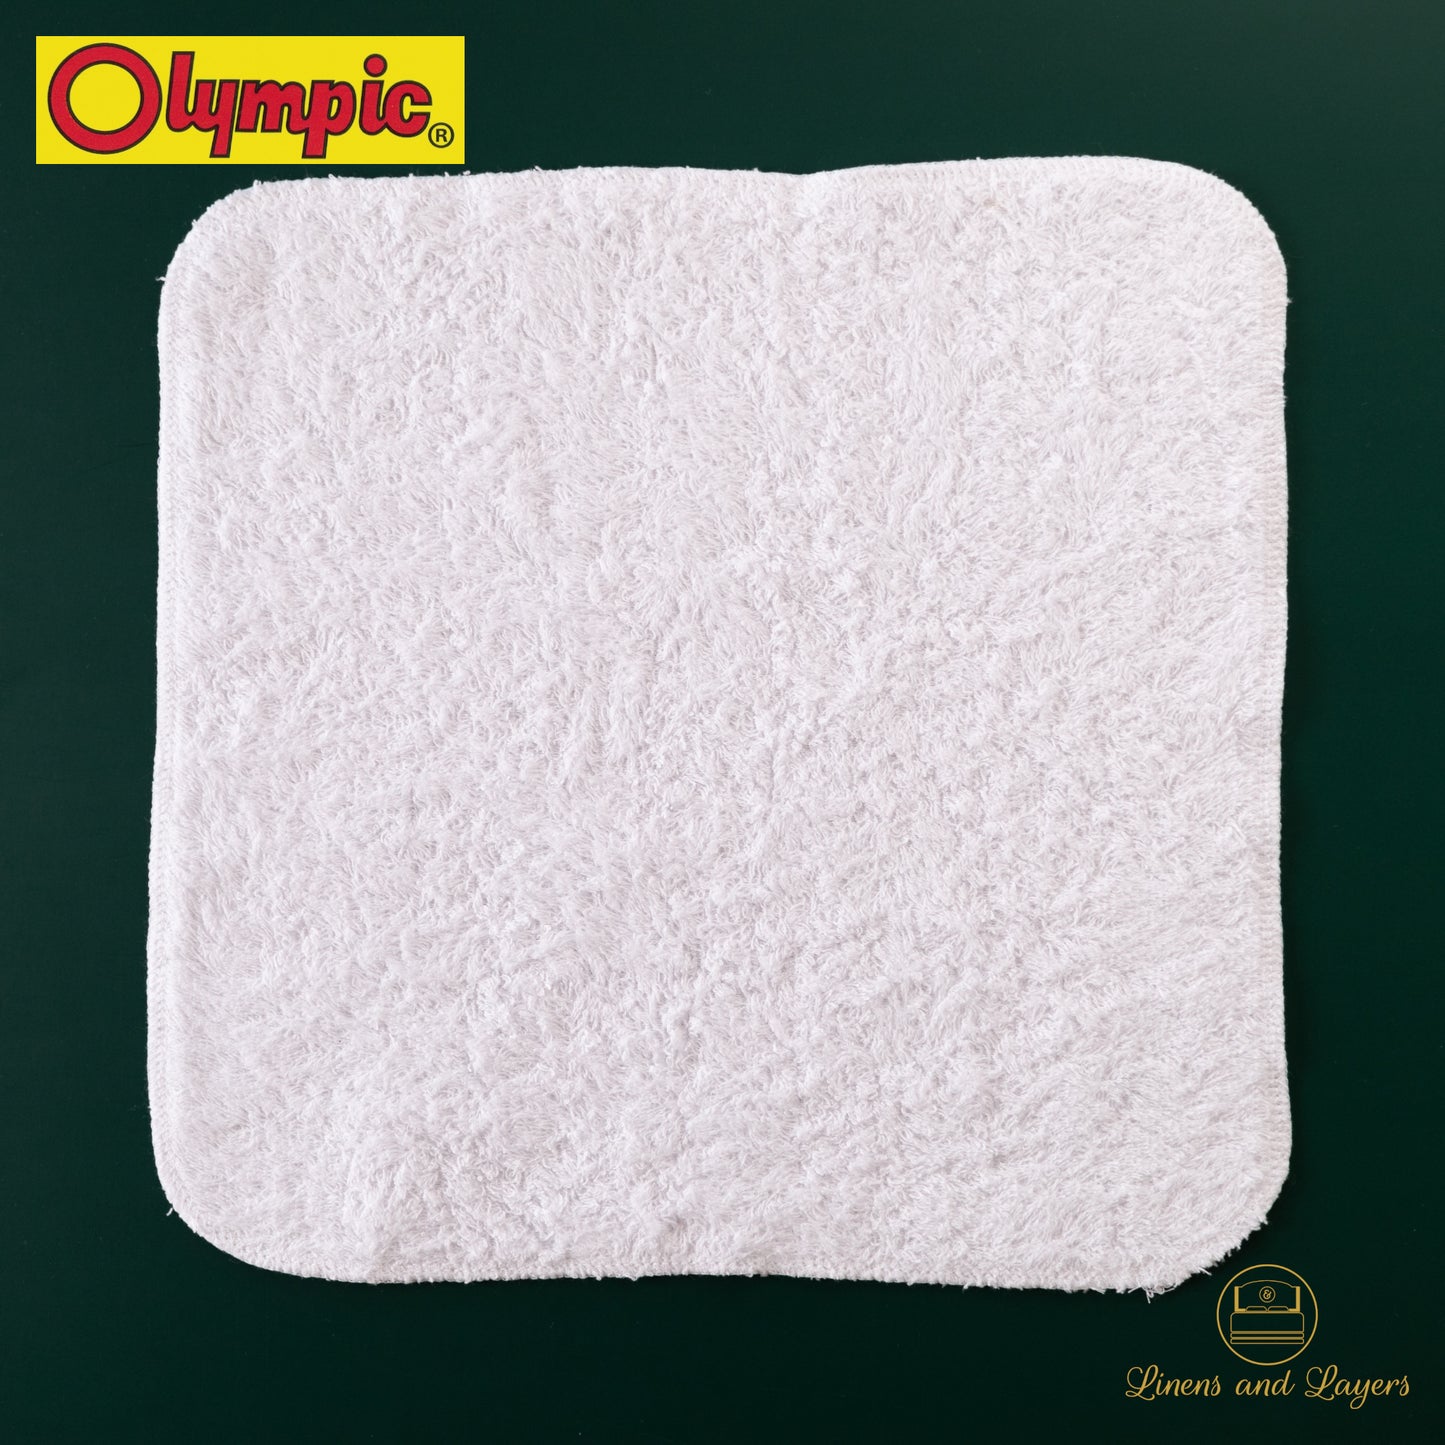 Olympic White Face Towel (430 GSM) - DK-1212 Terrycloth - 12x12 inches